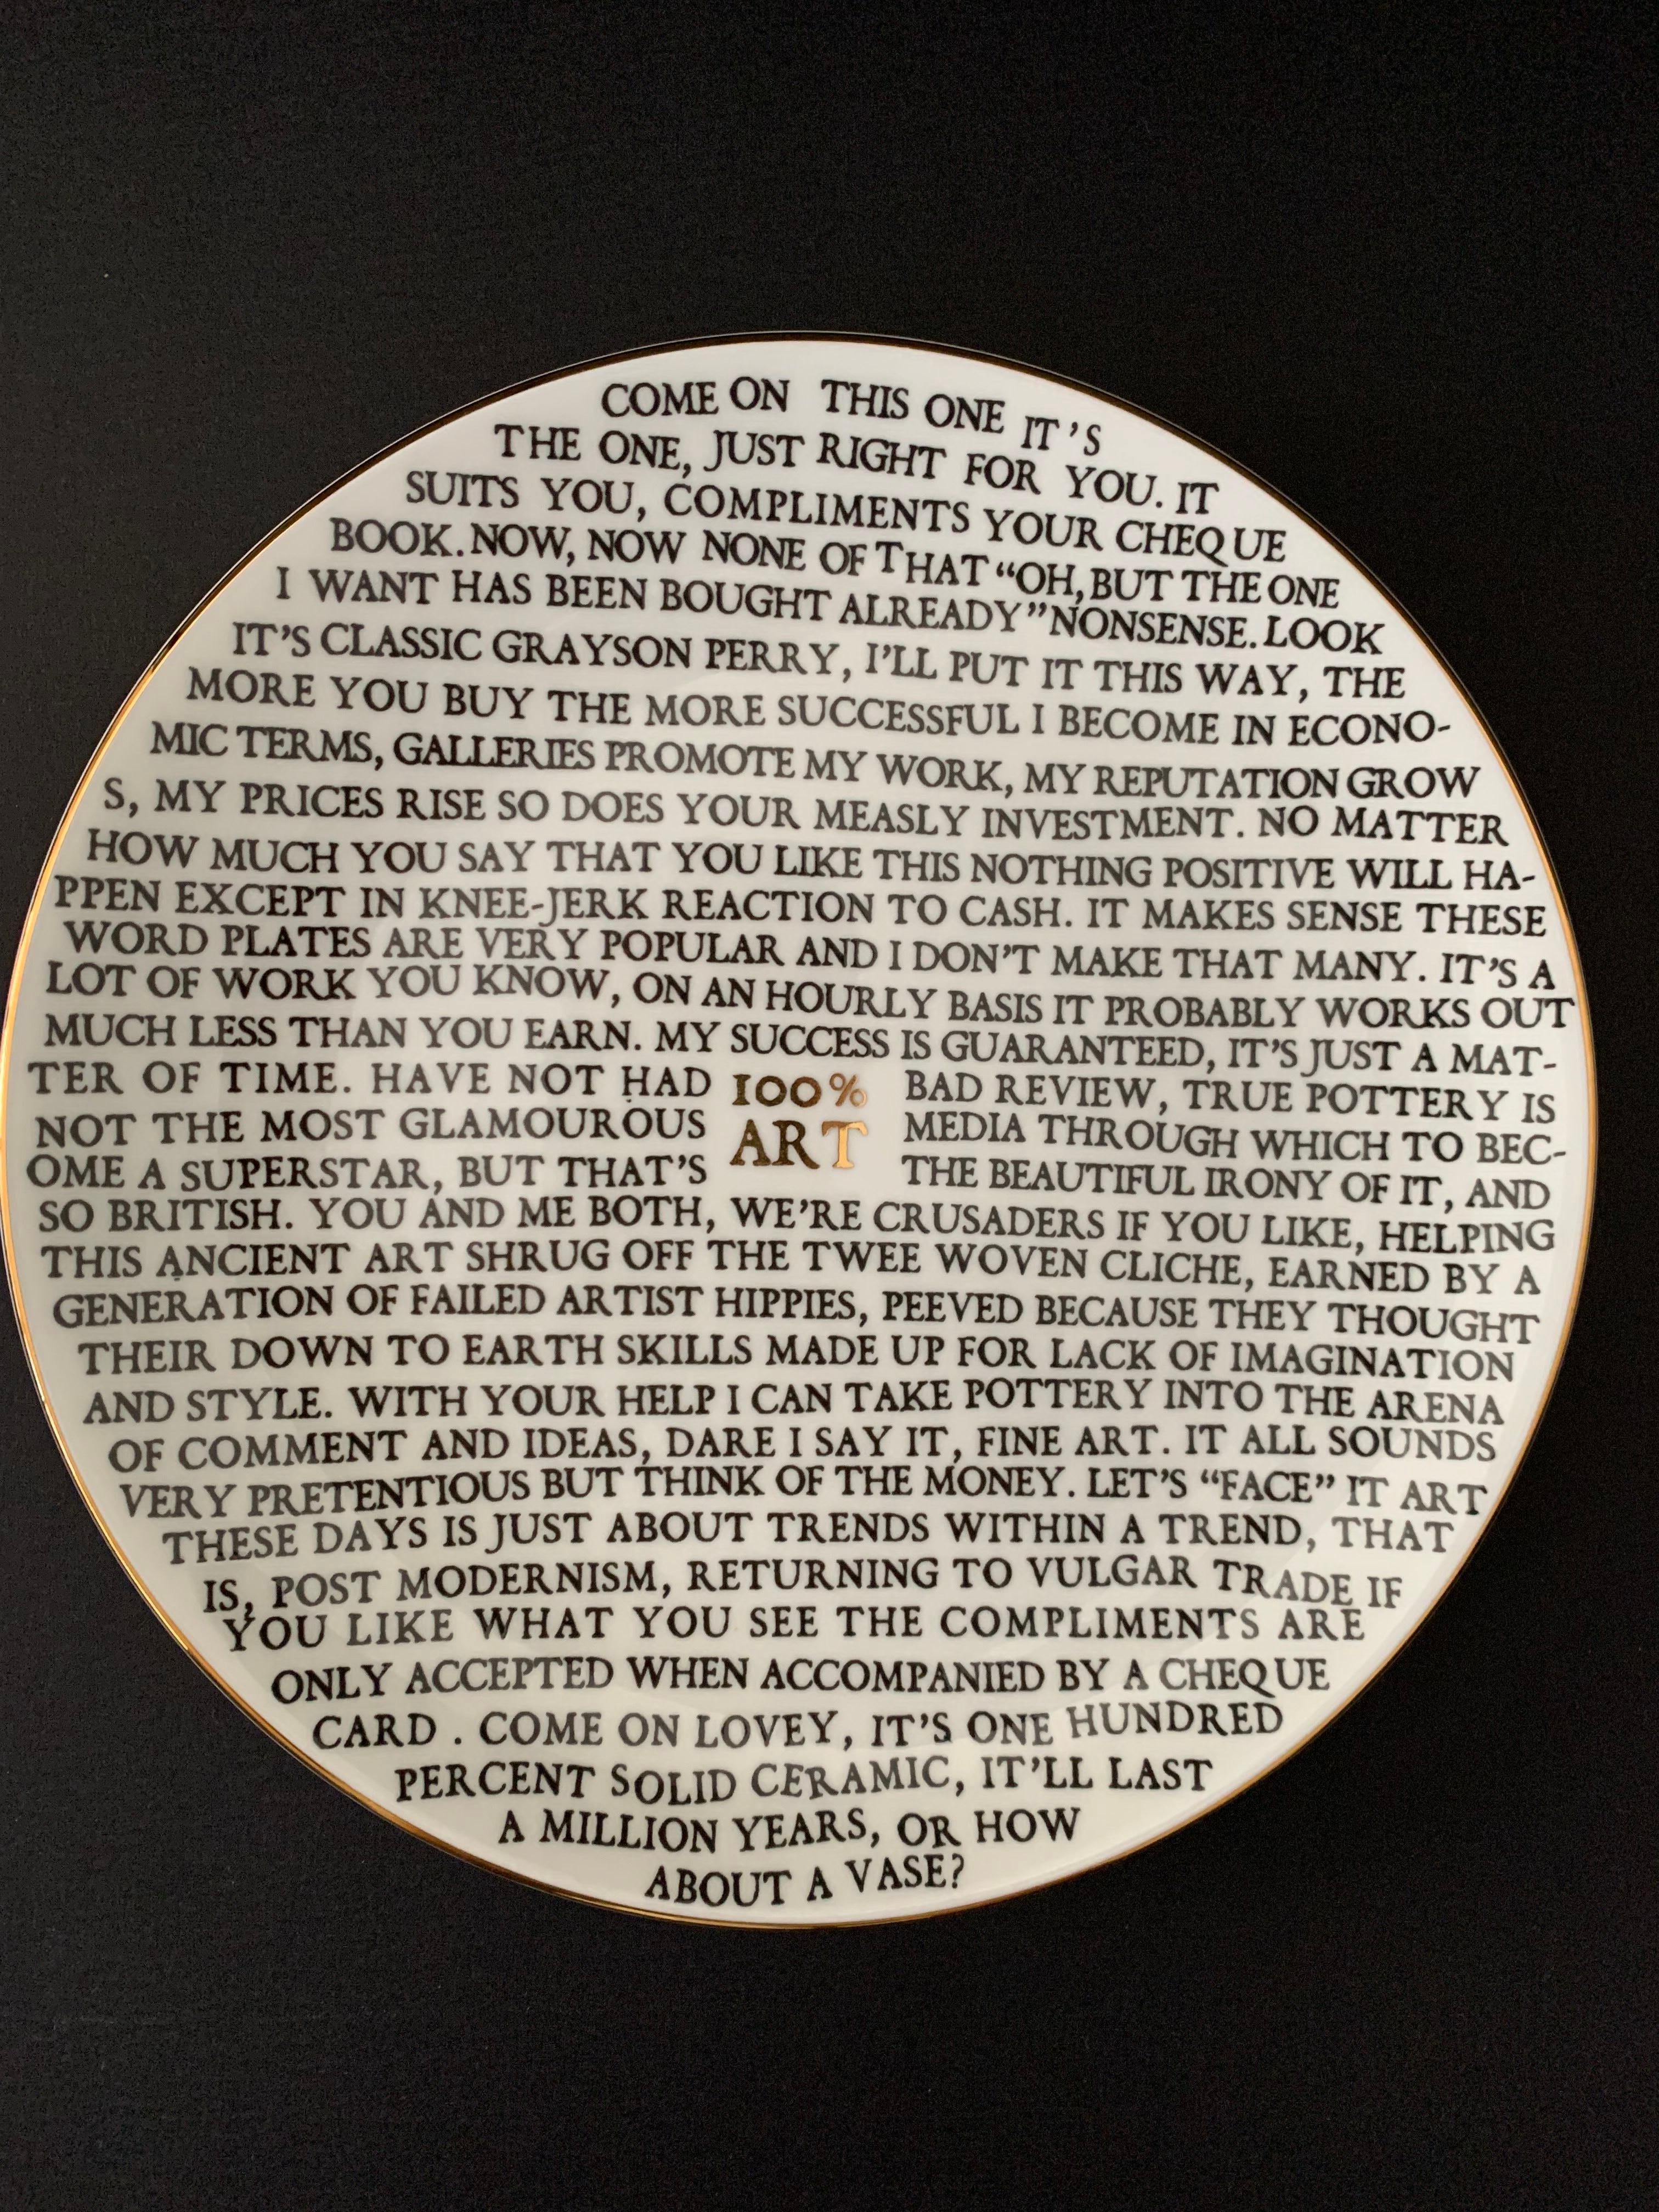 Limited Edition 100% Art on Porcelain Plate - Sculpture by Grayson Perry